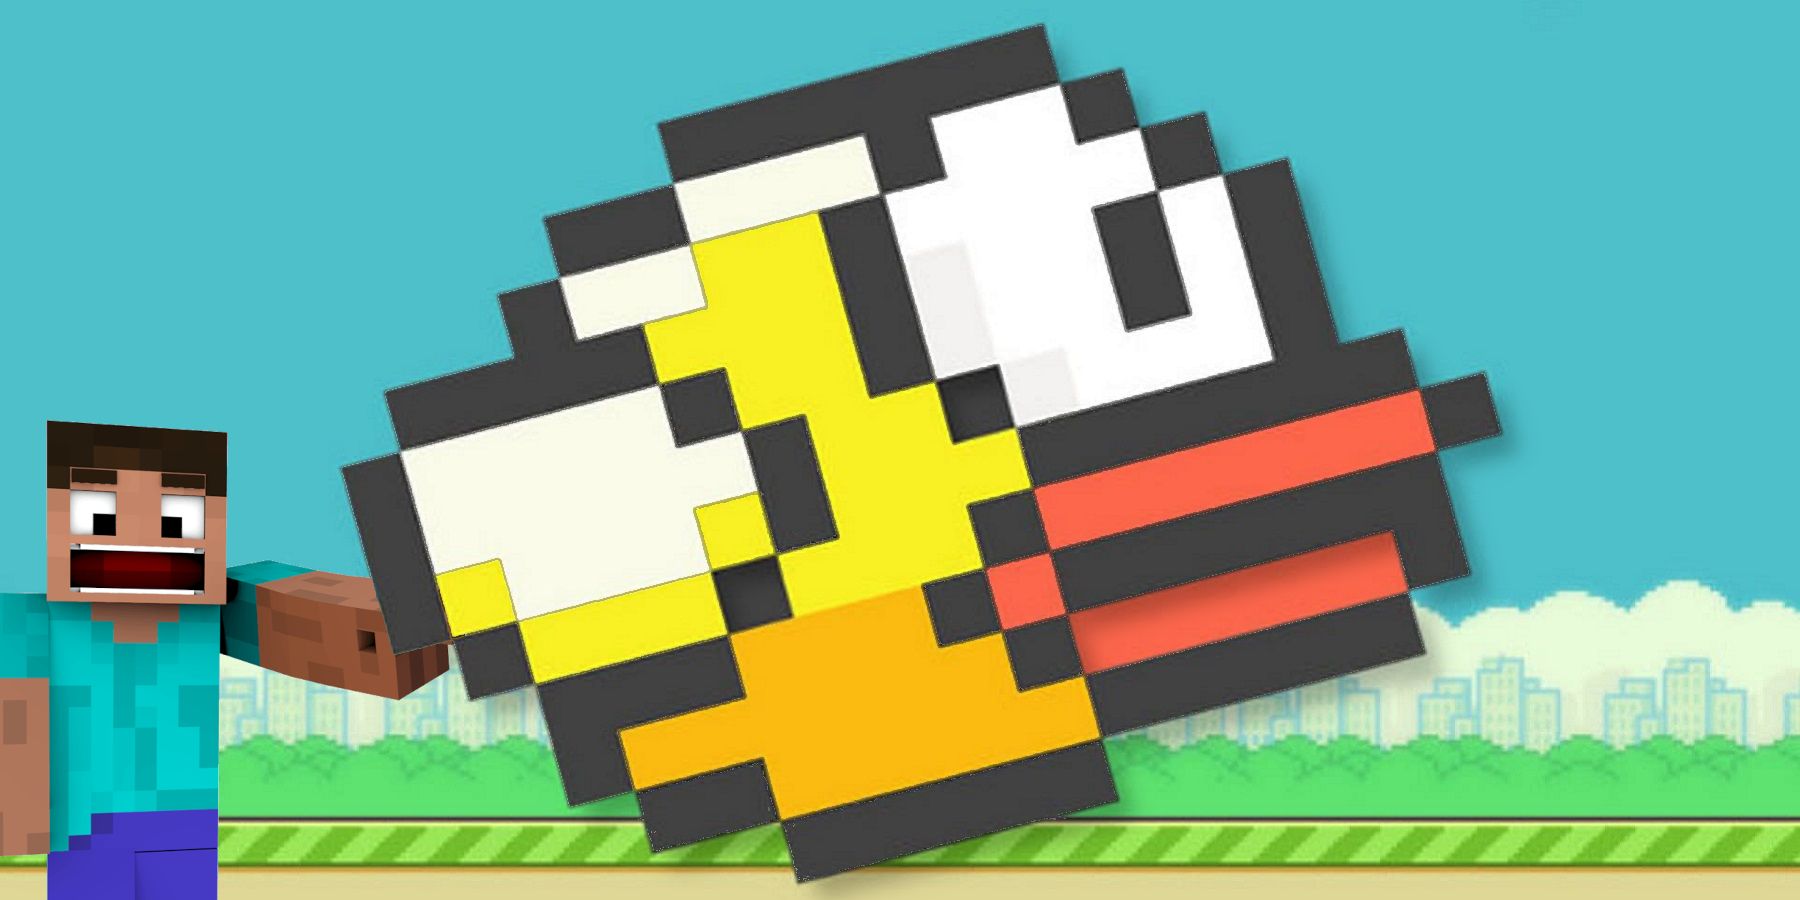 Image of the bird from Flappy Bird with Minecraft Steve to the side pointing at it.